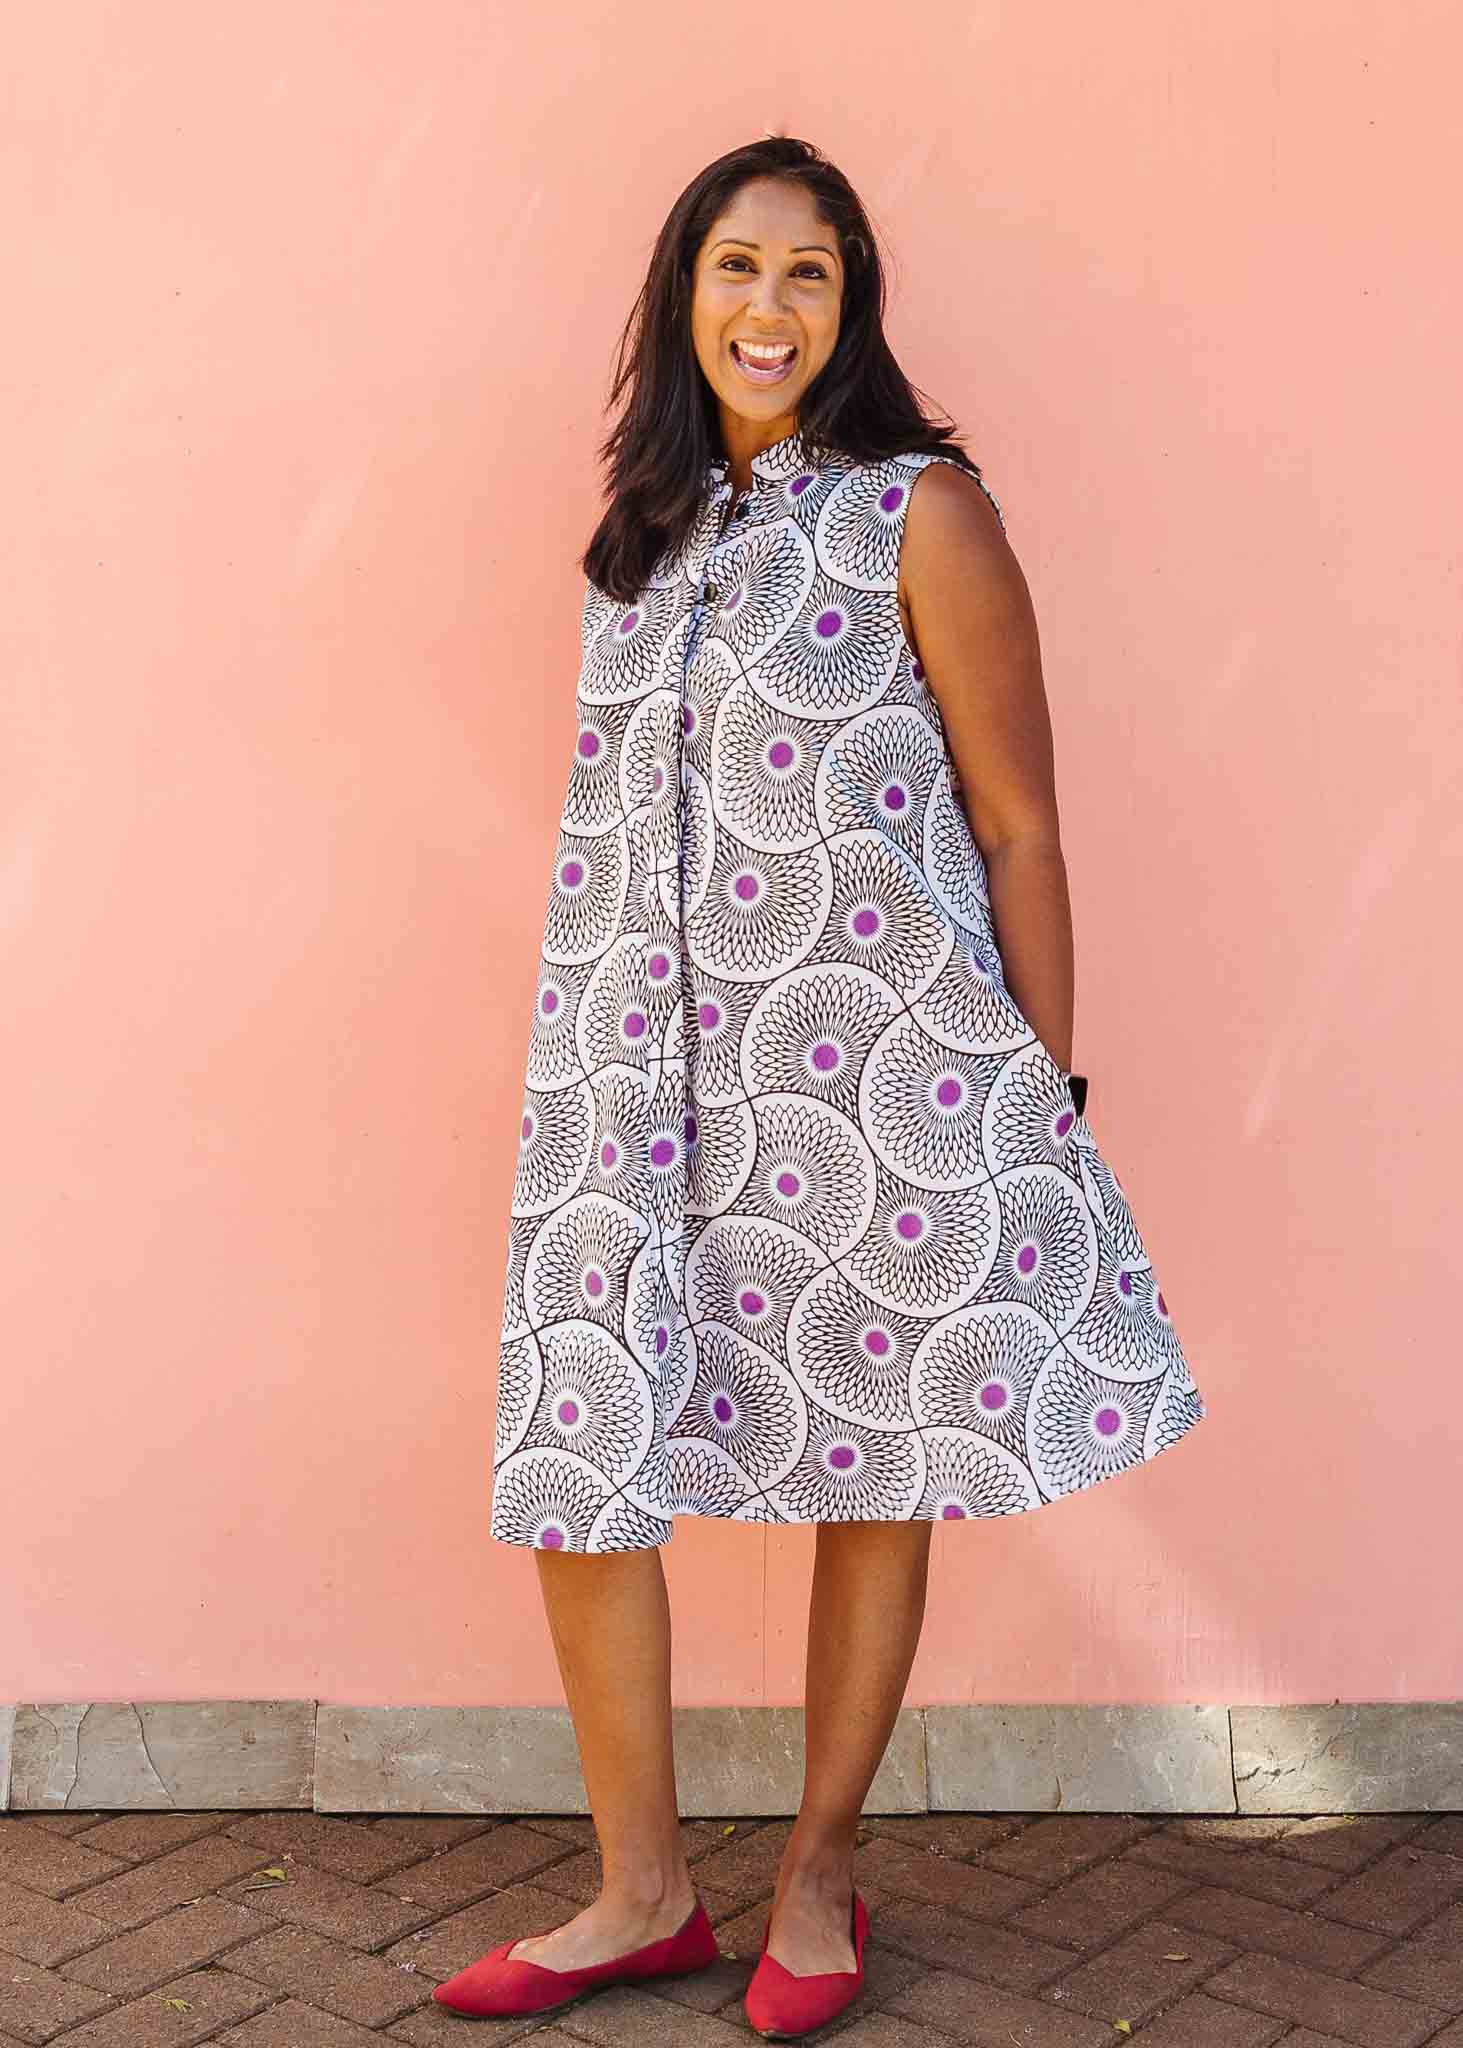 Model wearing white sleeveless dress with large black and purple floral print.